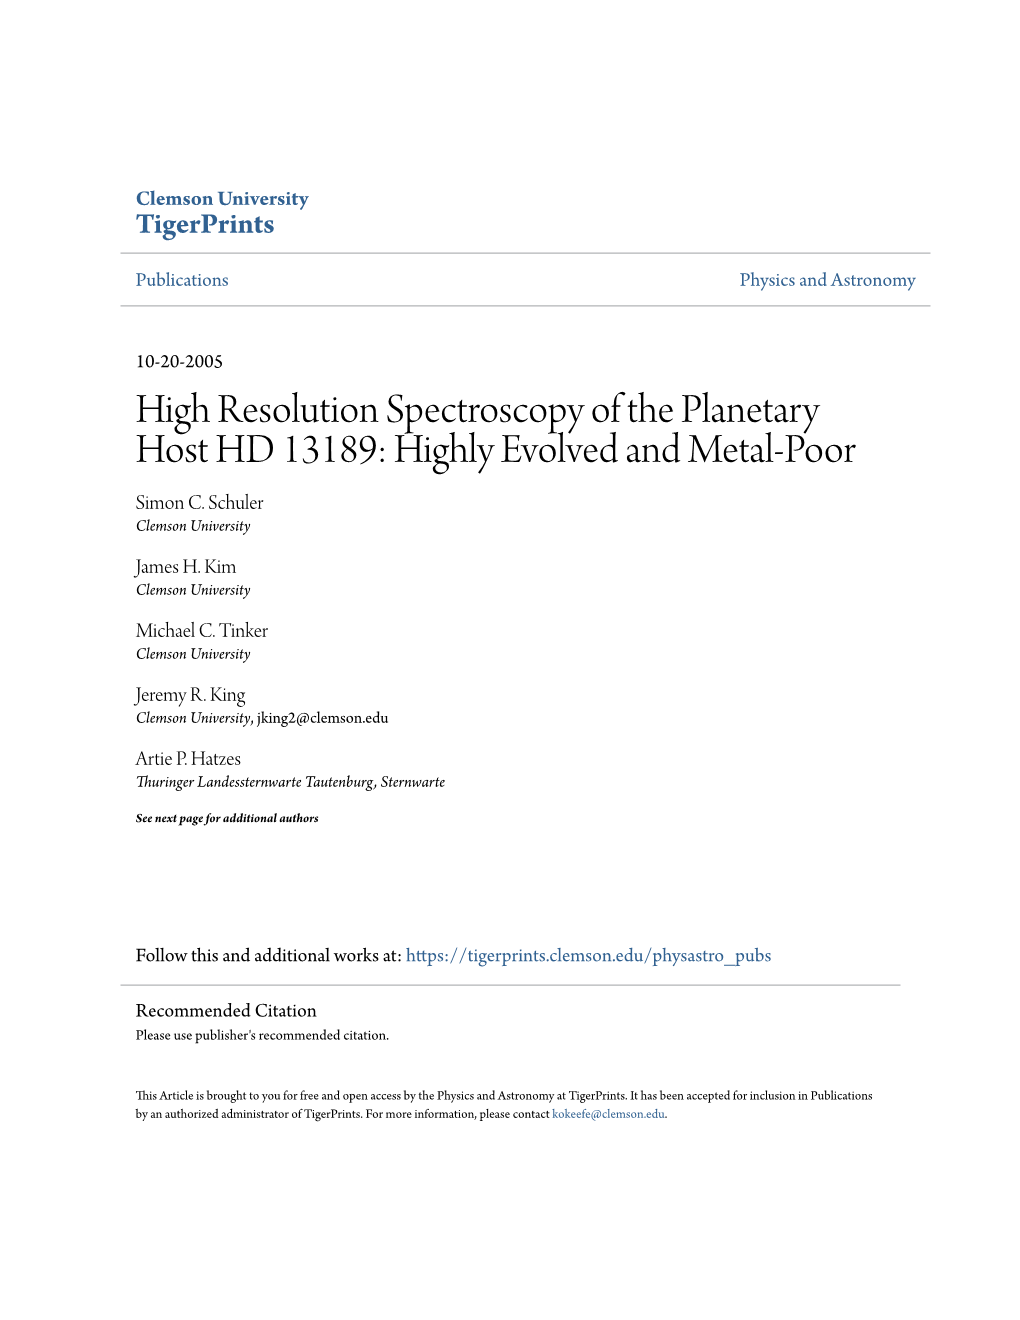 High Resolution Spectroscopy of the Planetary Host HD 13189: Highly Evolved and Metal-Poor Simon C